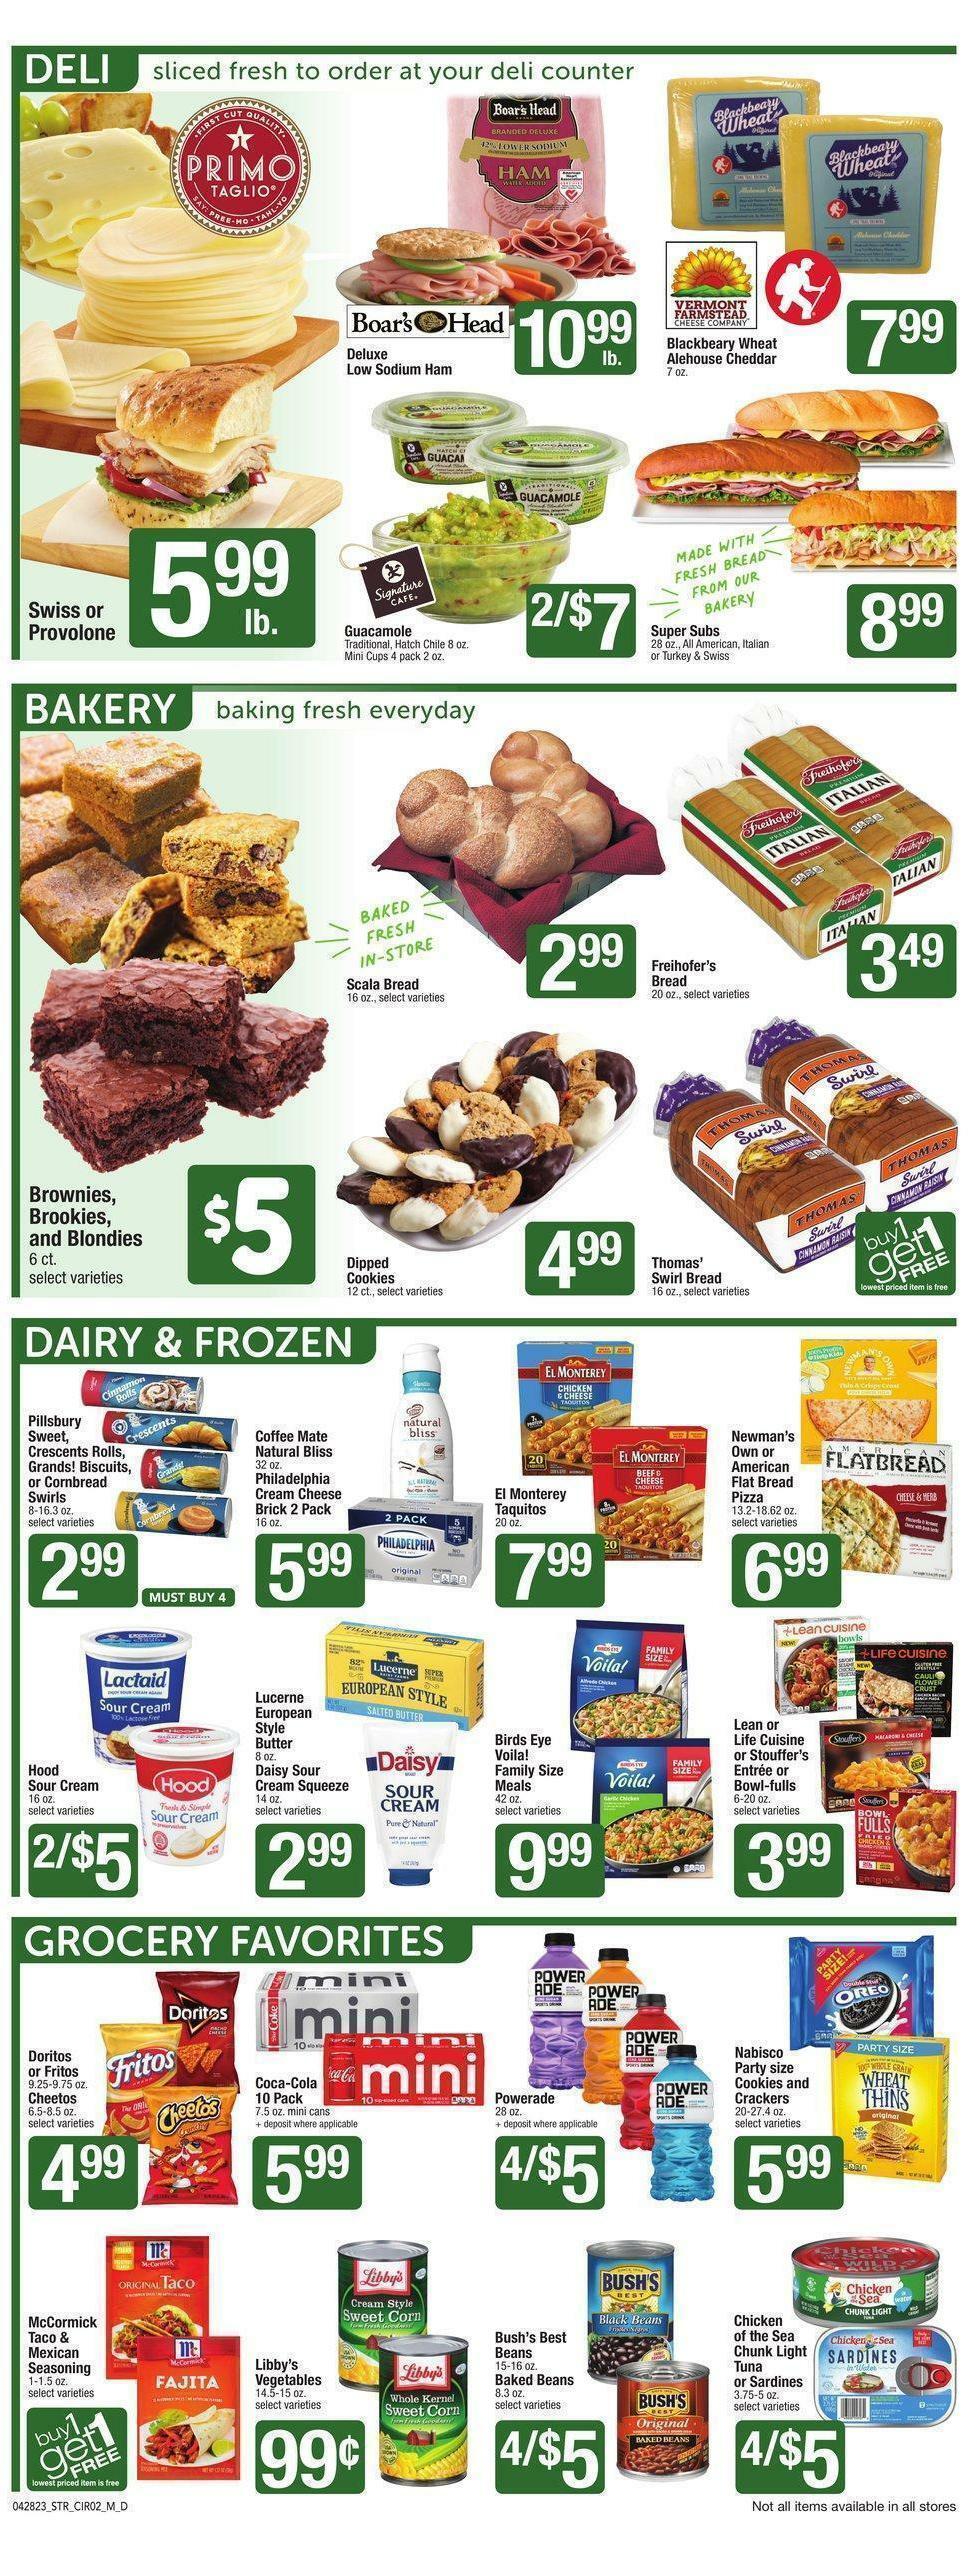 Star Market Weekly Ad from April 28